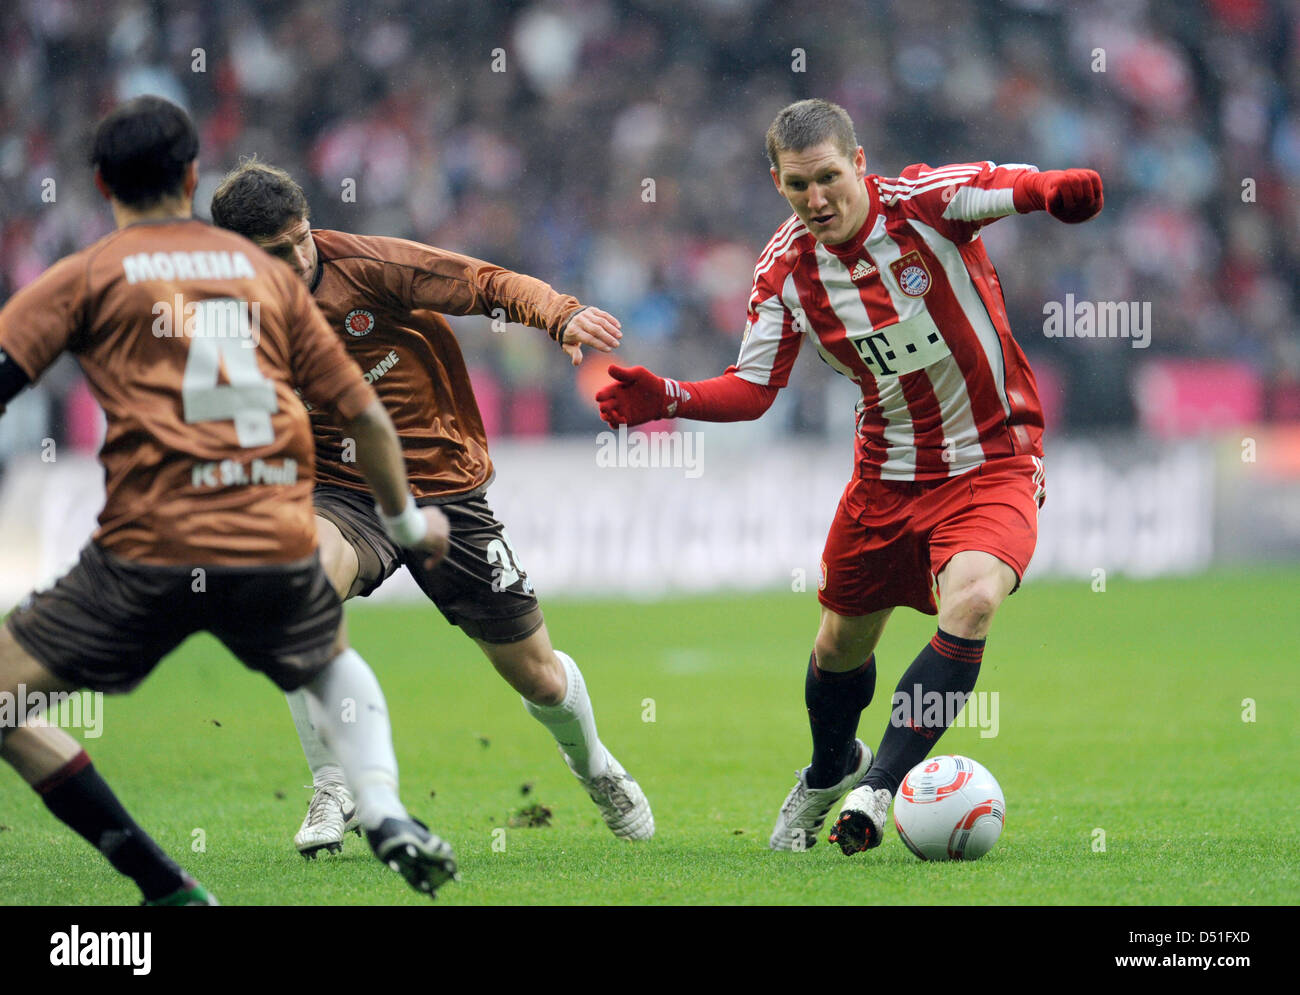 Bayern'sBastian Schweinsteiger (r) tackles Moritz Volz during a German Bundesliga match of FC Bayern Munich versus FC St. Pauli in Munich, Germany, 11 December 2010. Photo: Andreas Gebert    ATTENTION: EMBARGO CONDITIONS! The DFL permits the further utilisation of the pictures in IPTV, mobile services and other new technologies only no earlier than two hours after the end of the ma Stock Photo